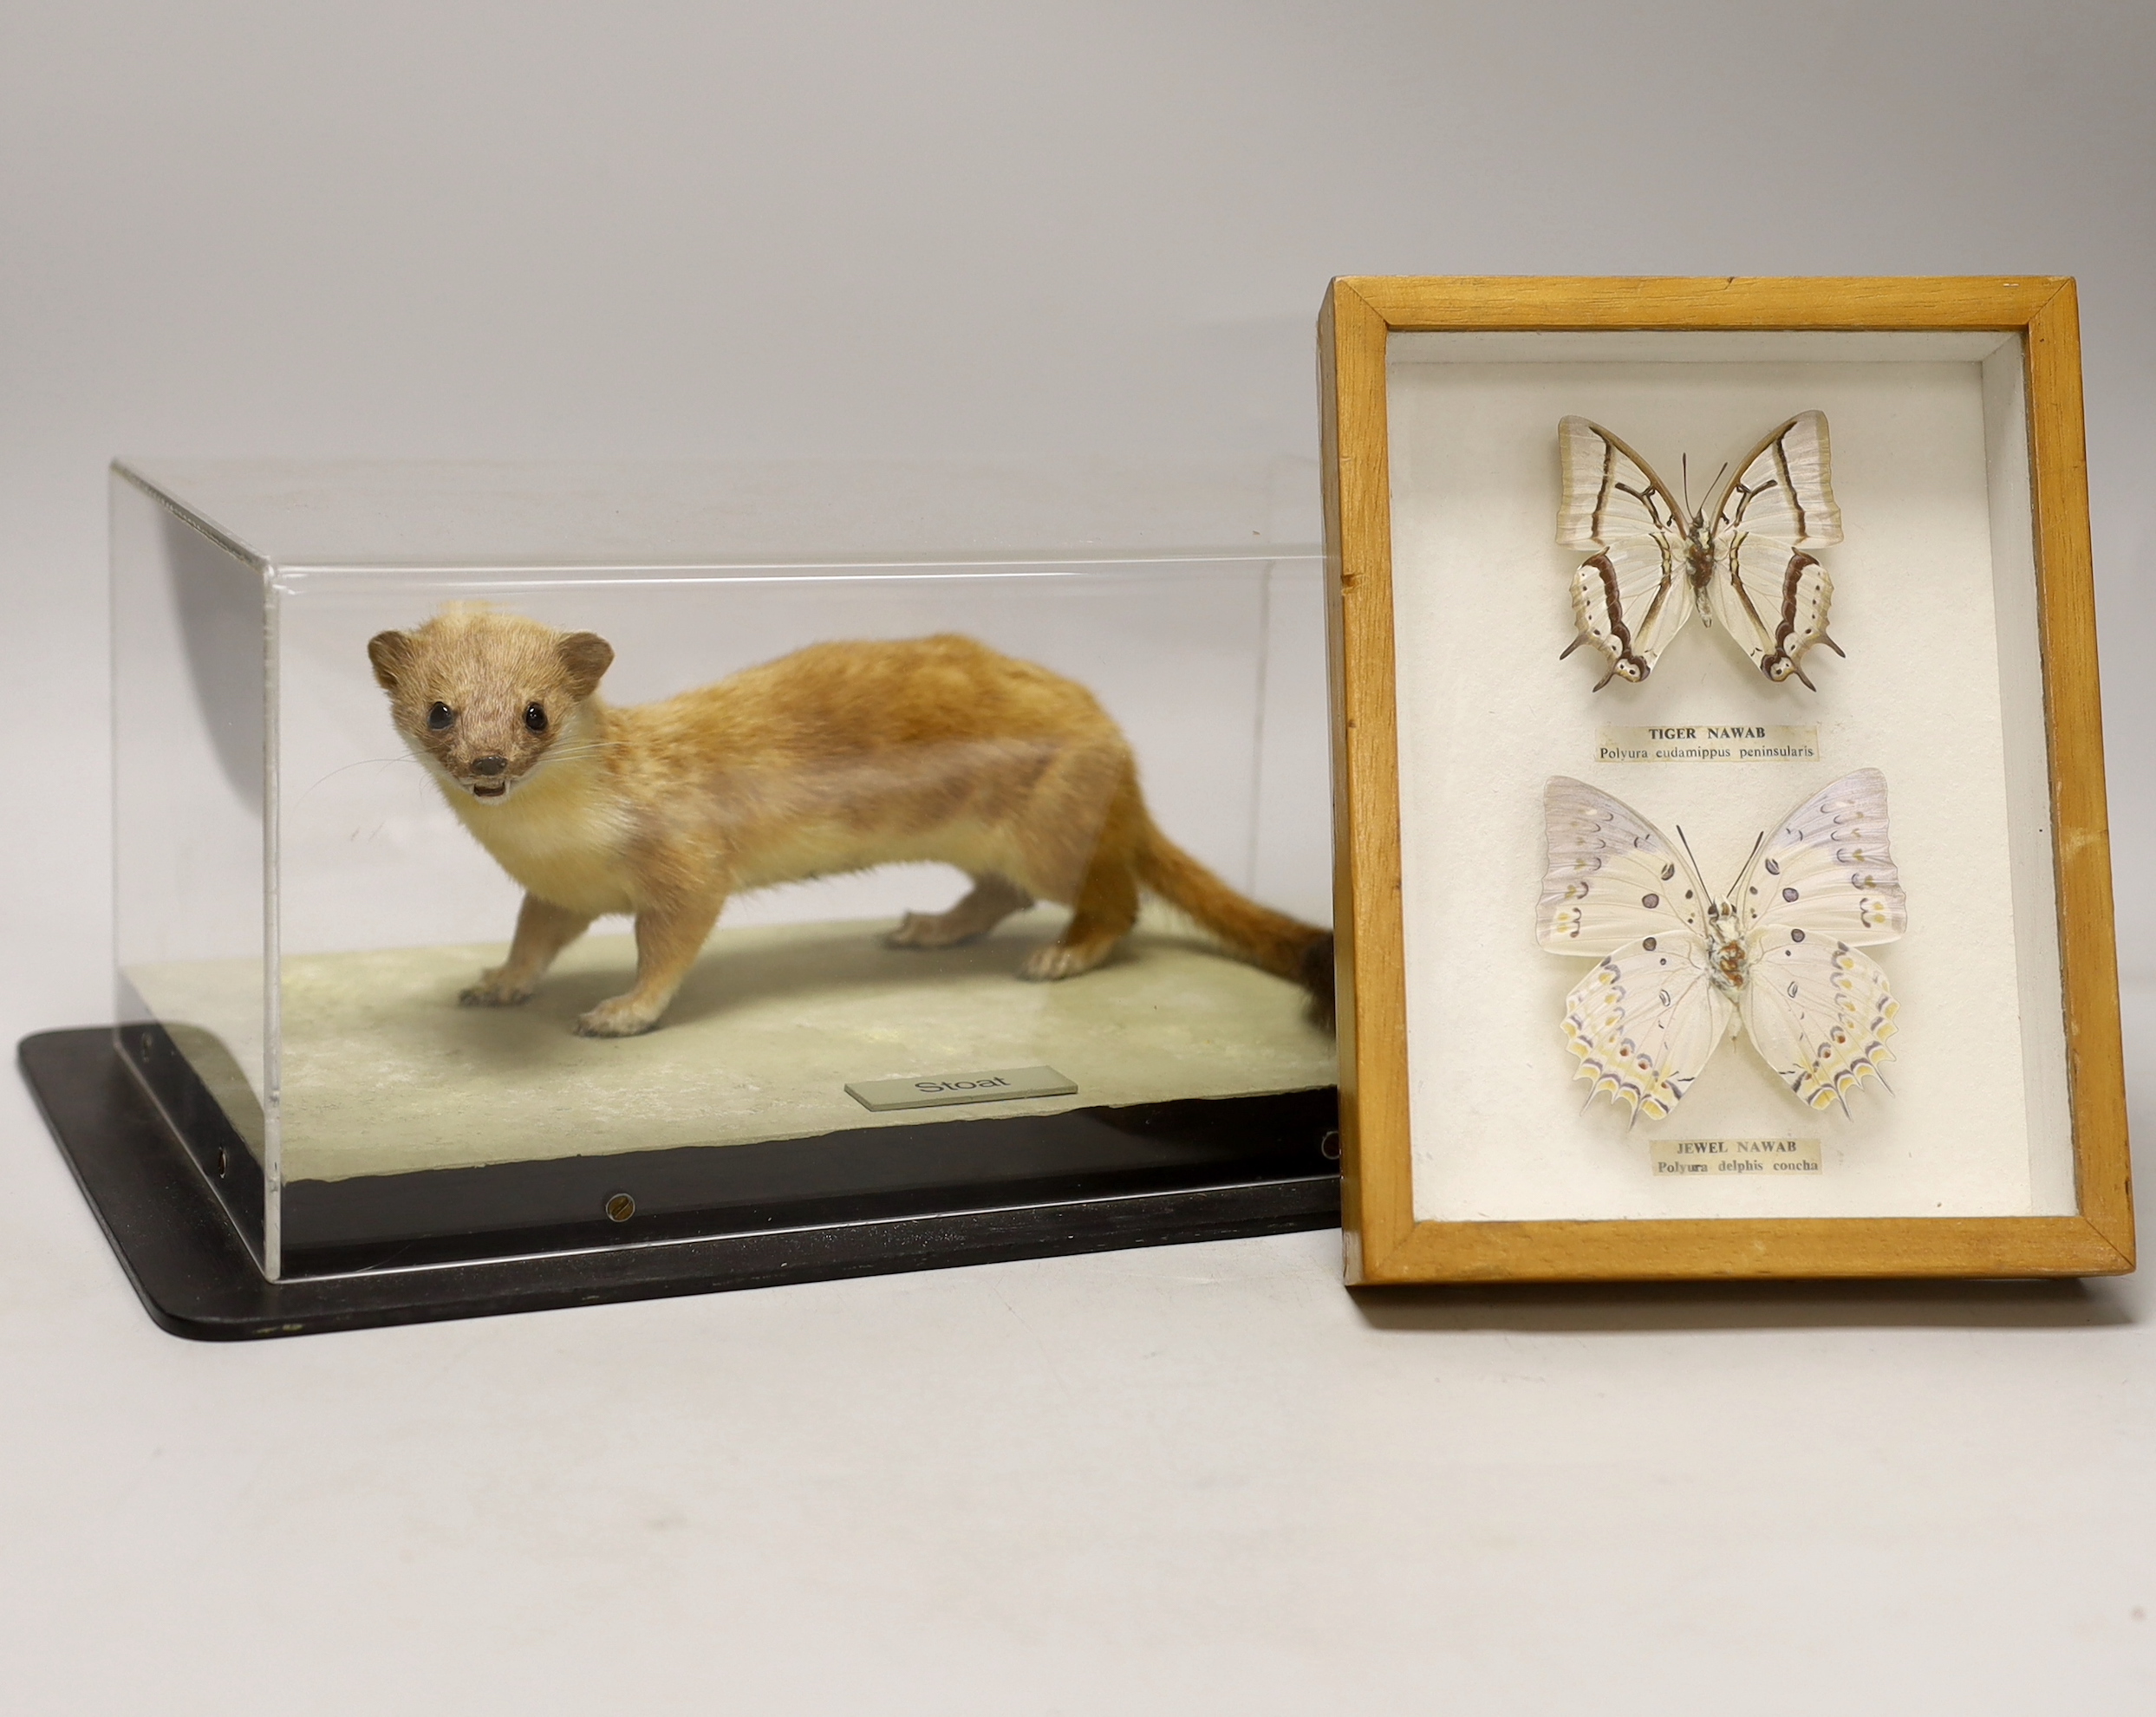 A cased museum mounted taxidermy specimen of a stoat and two mounted moths